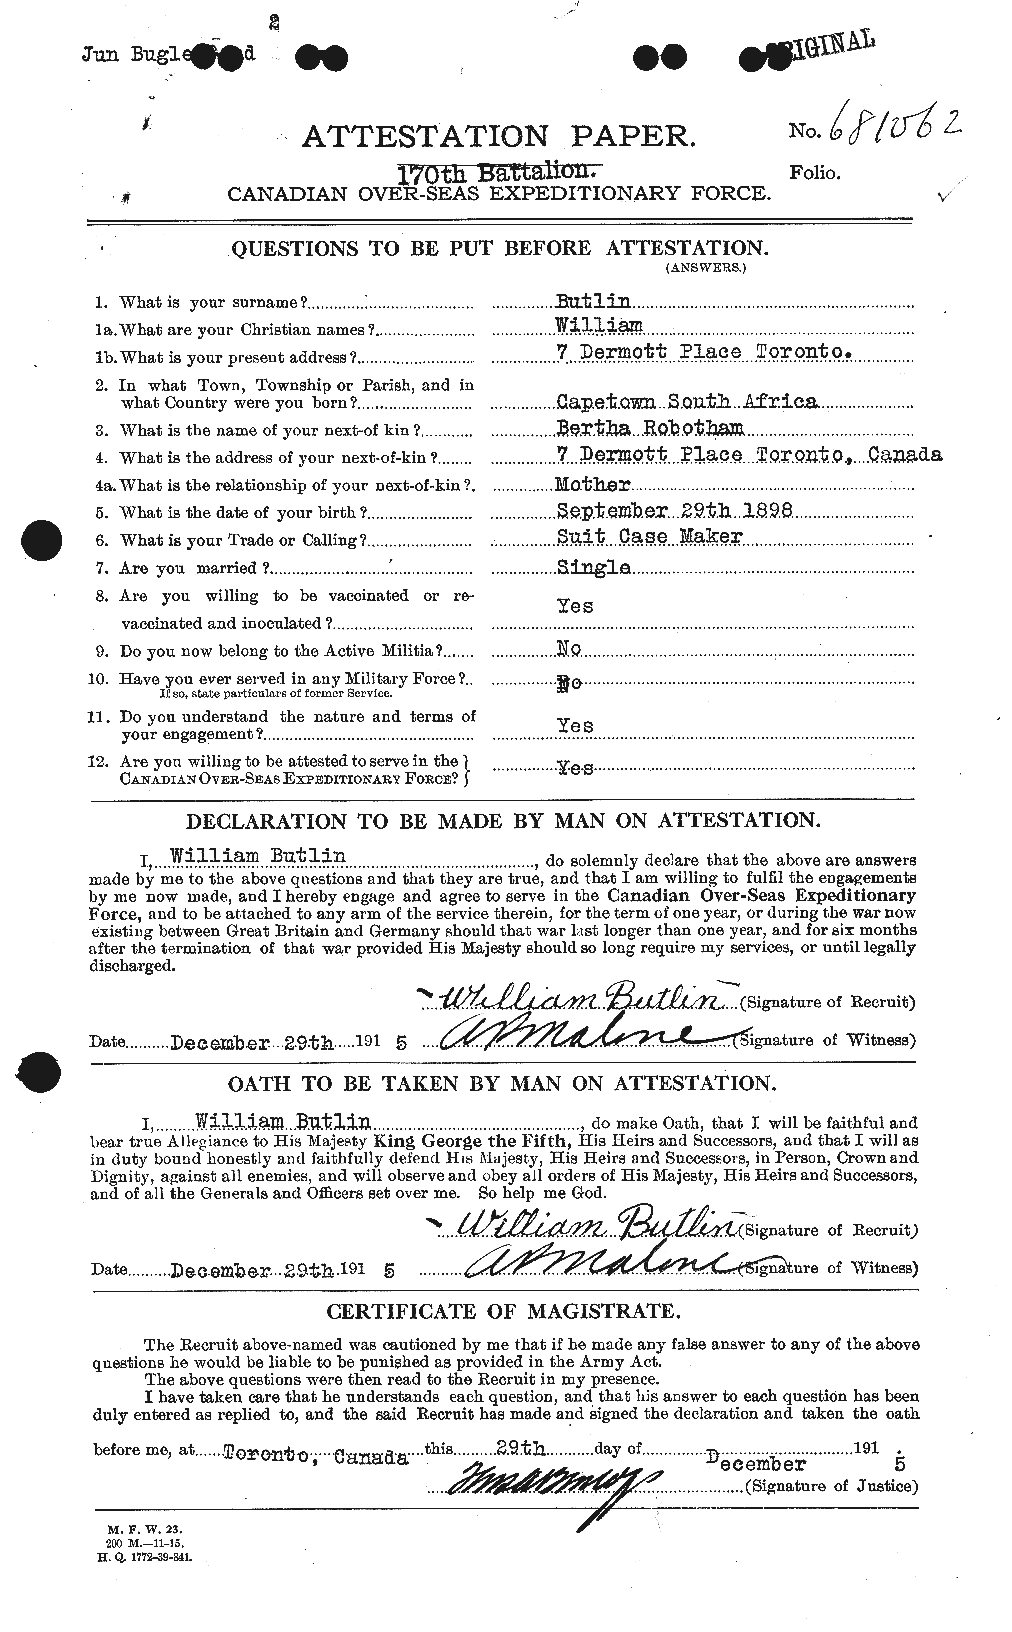 Personnel Records of the First World War - CEF 278134a